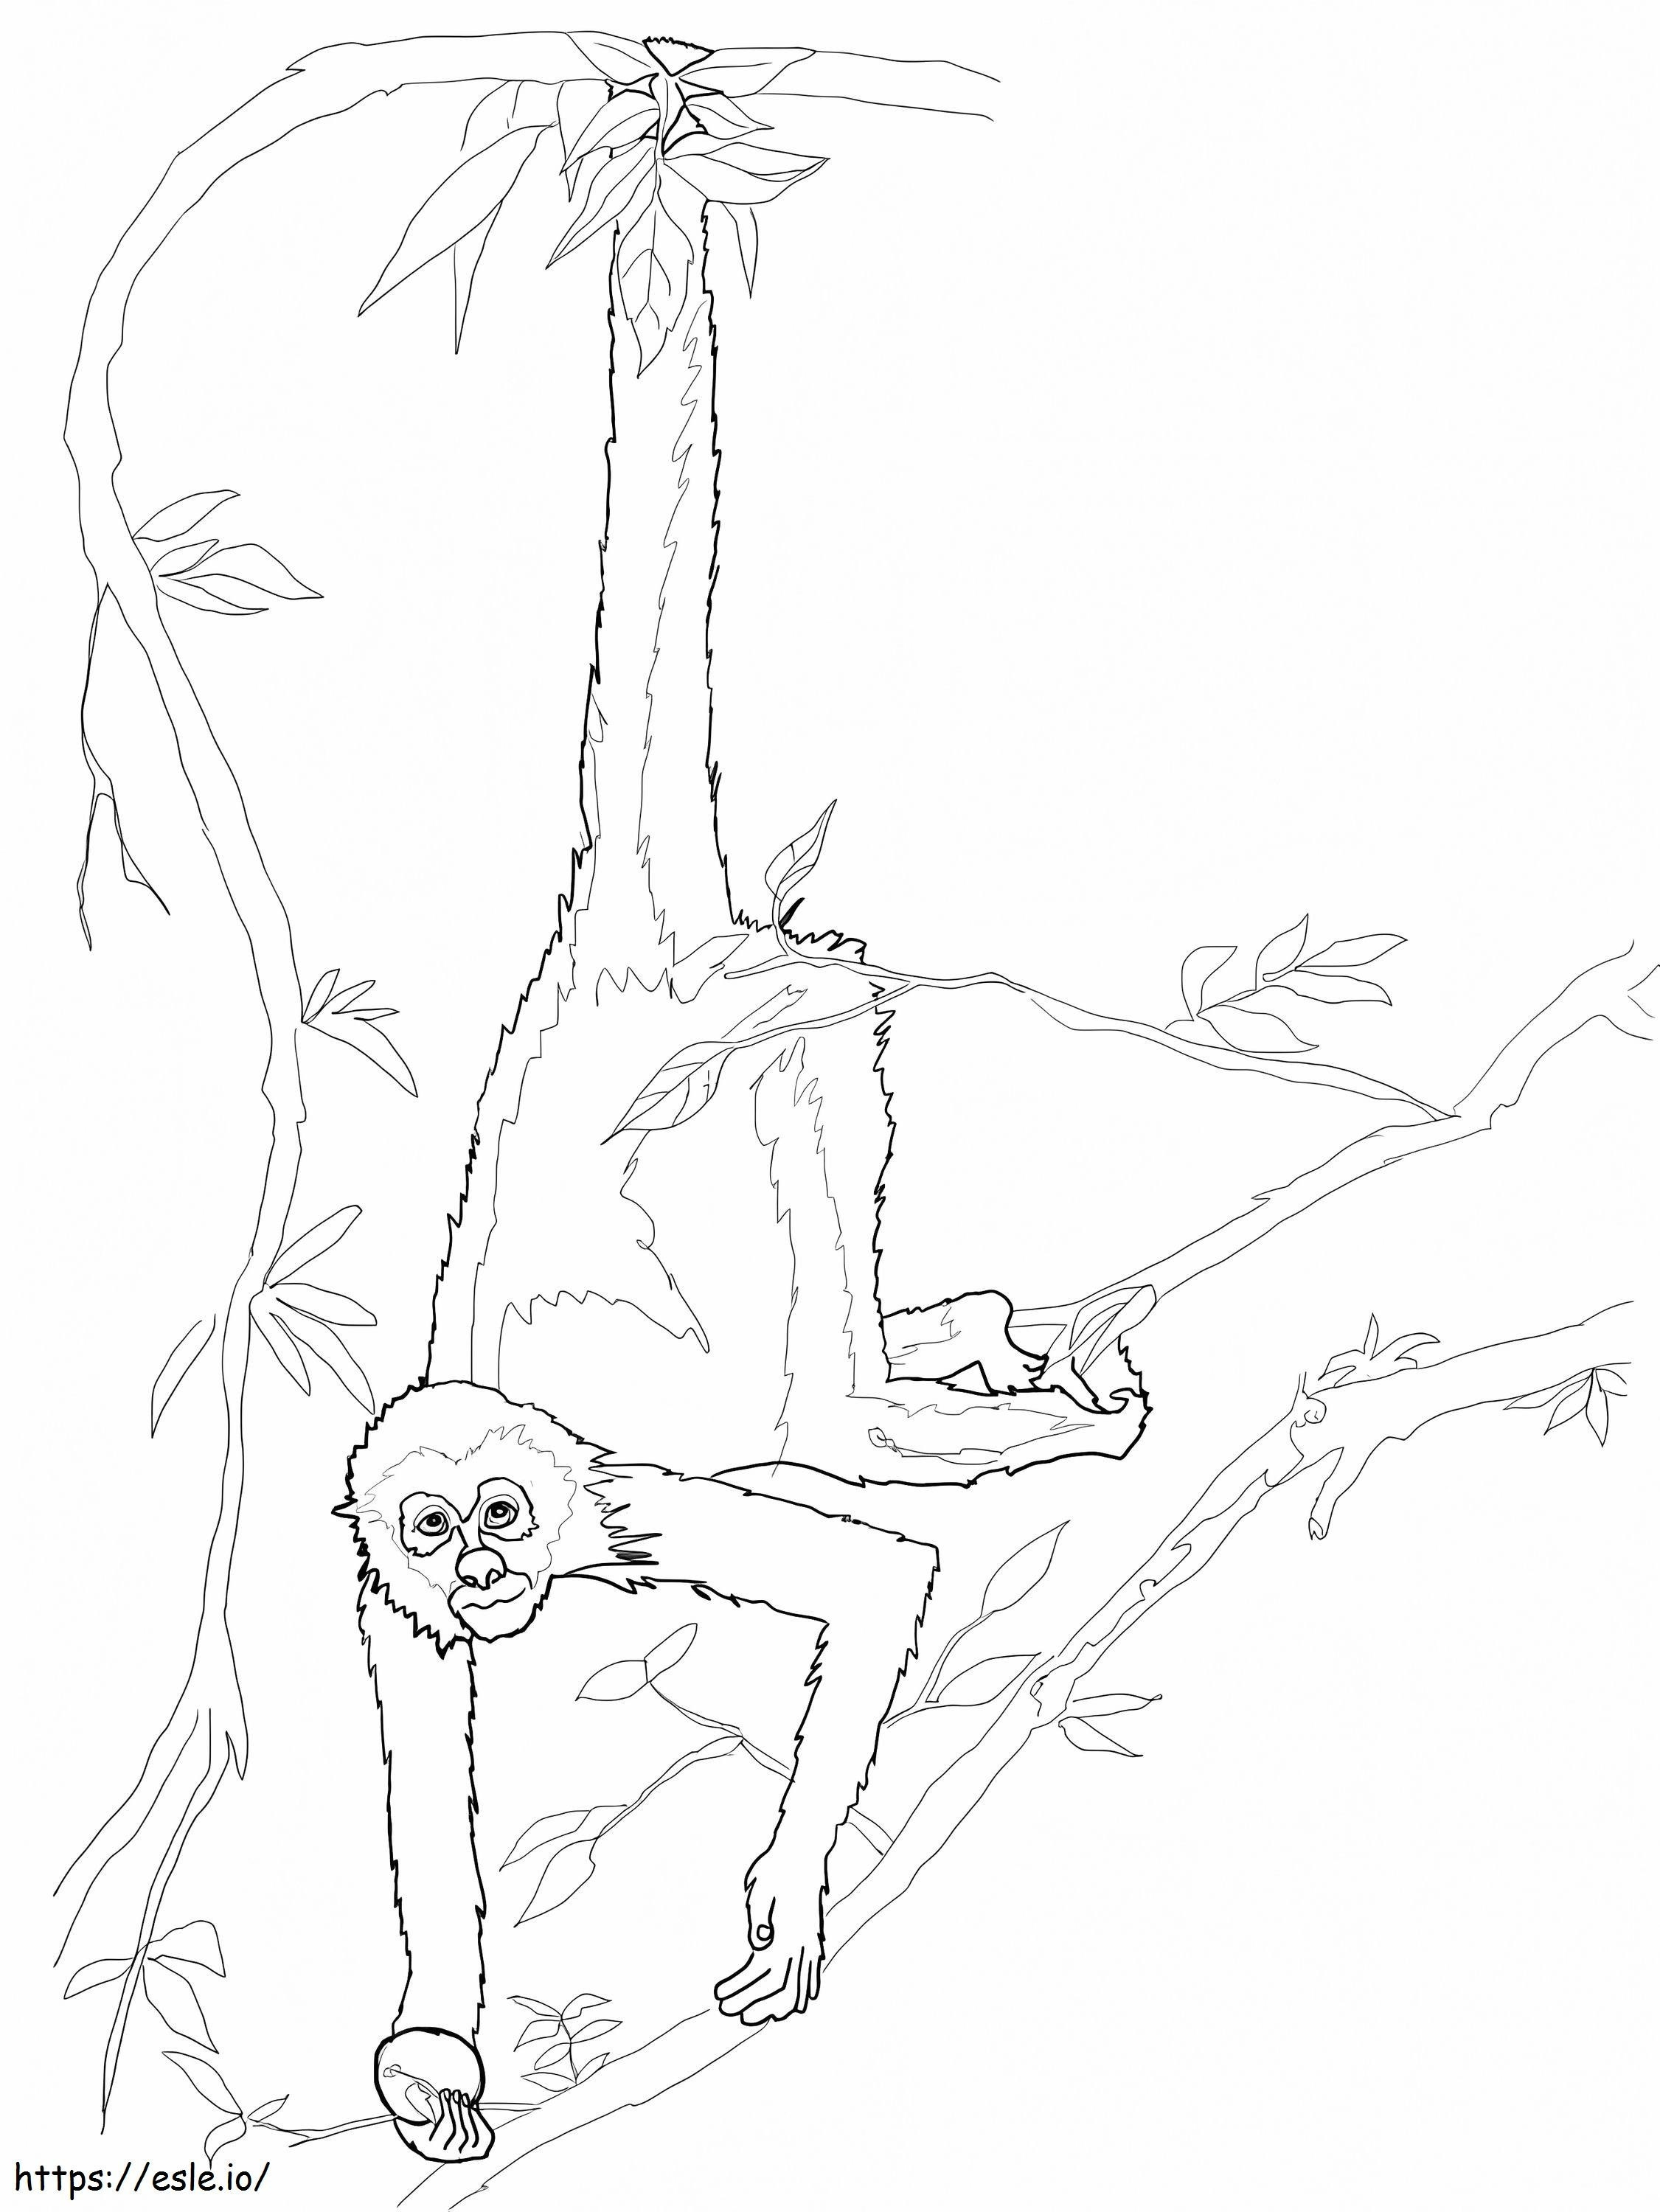 Spider Monkey coloring page